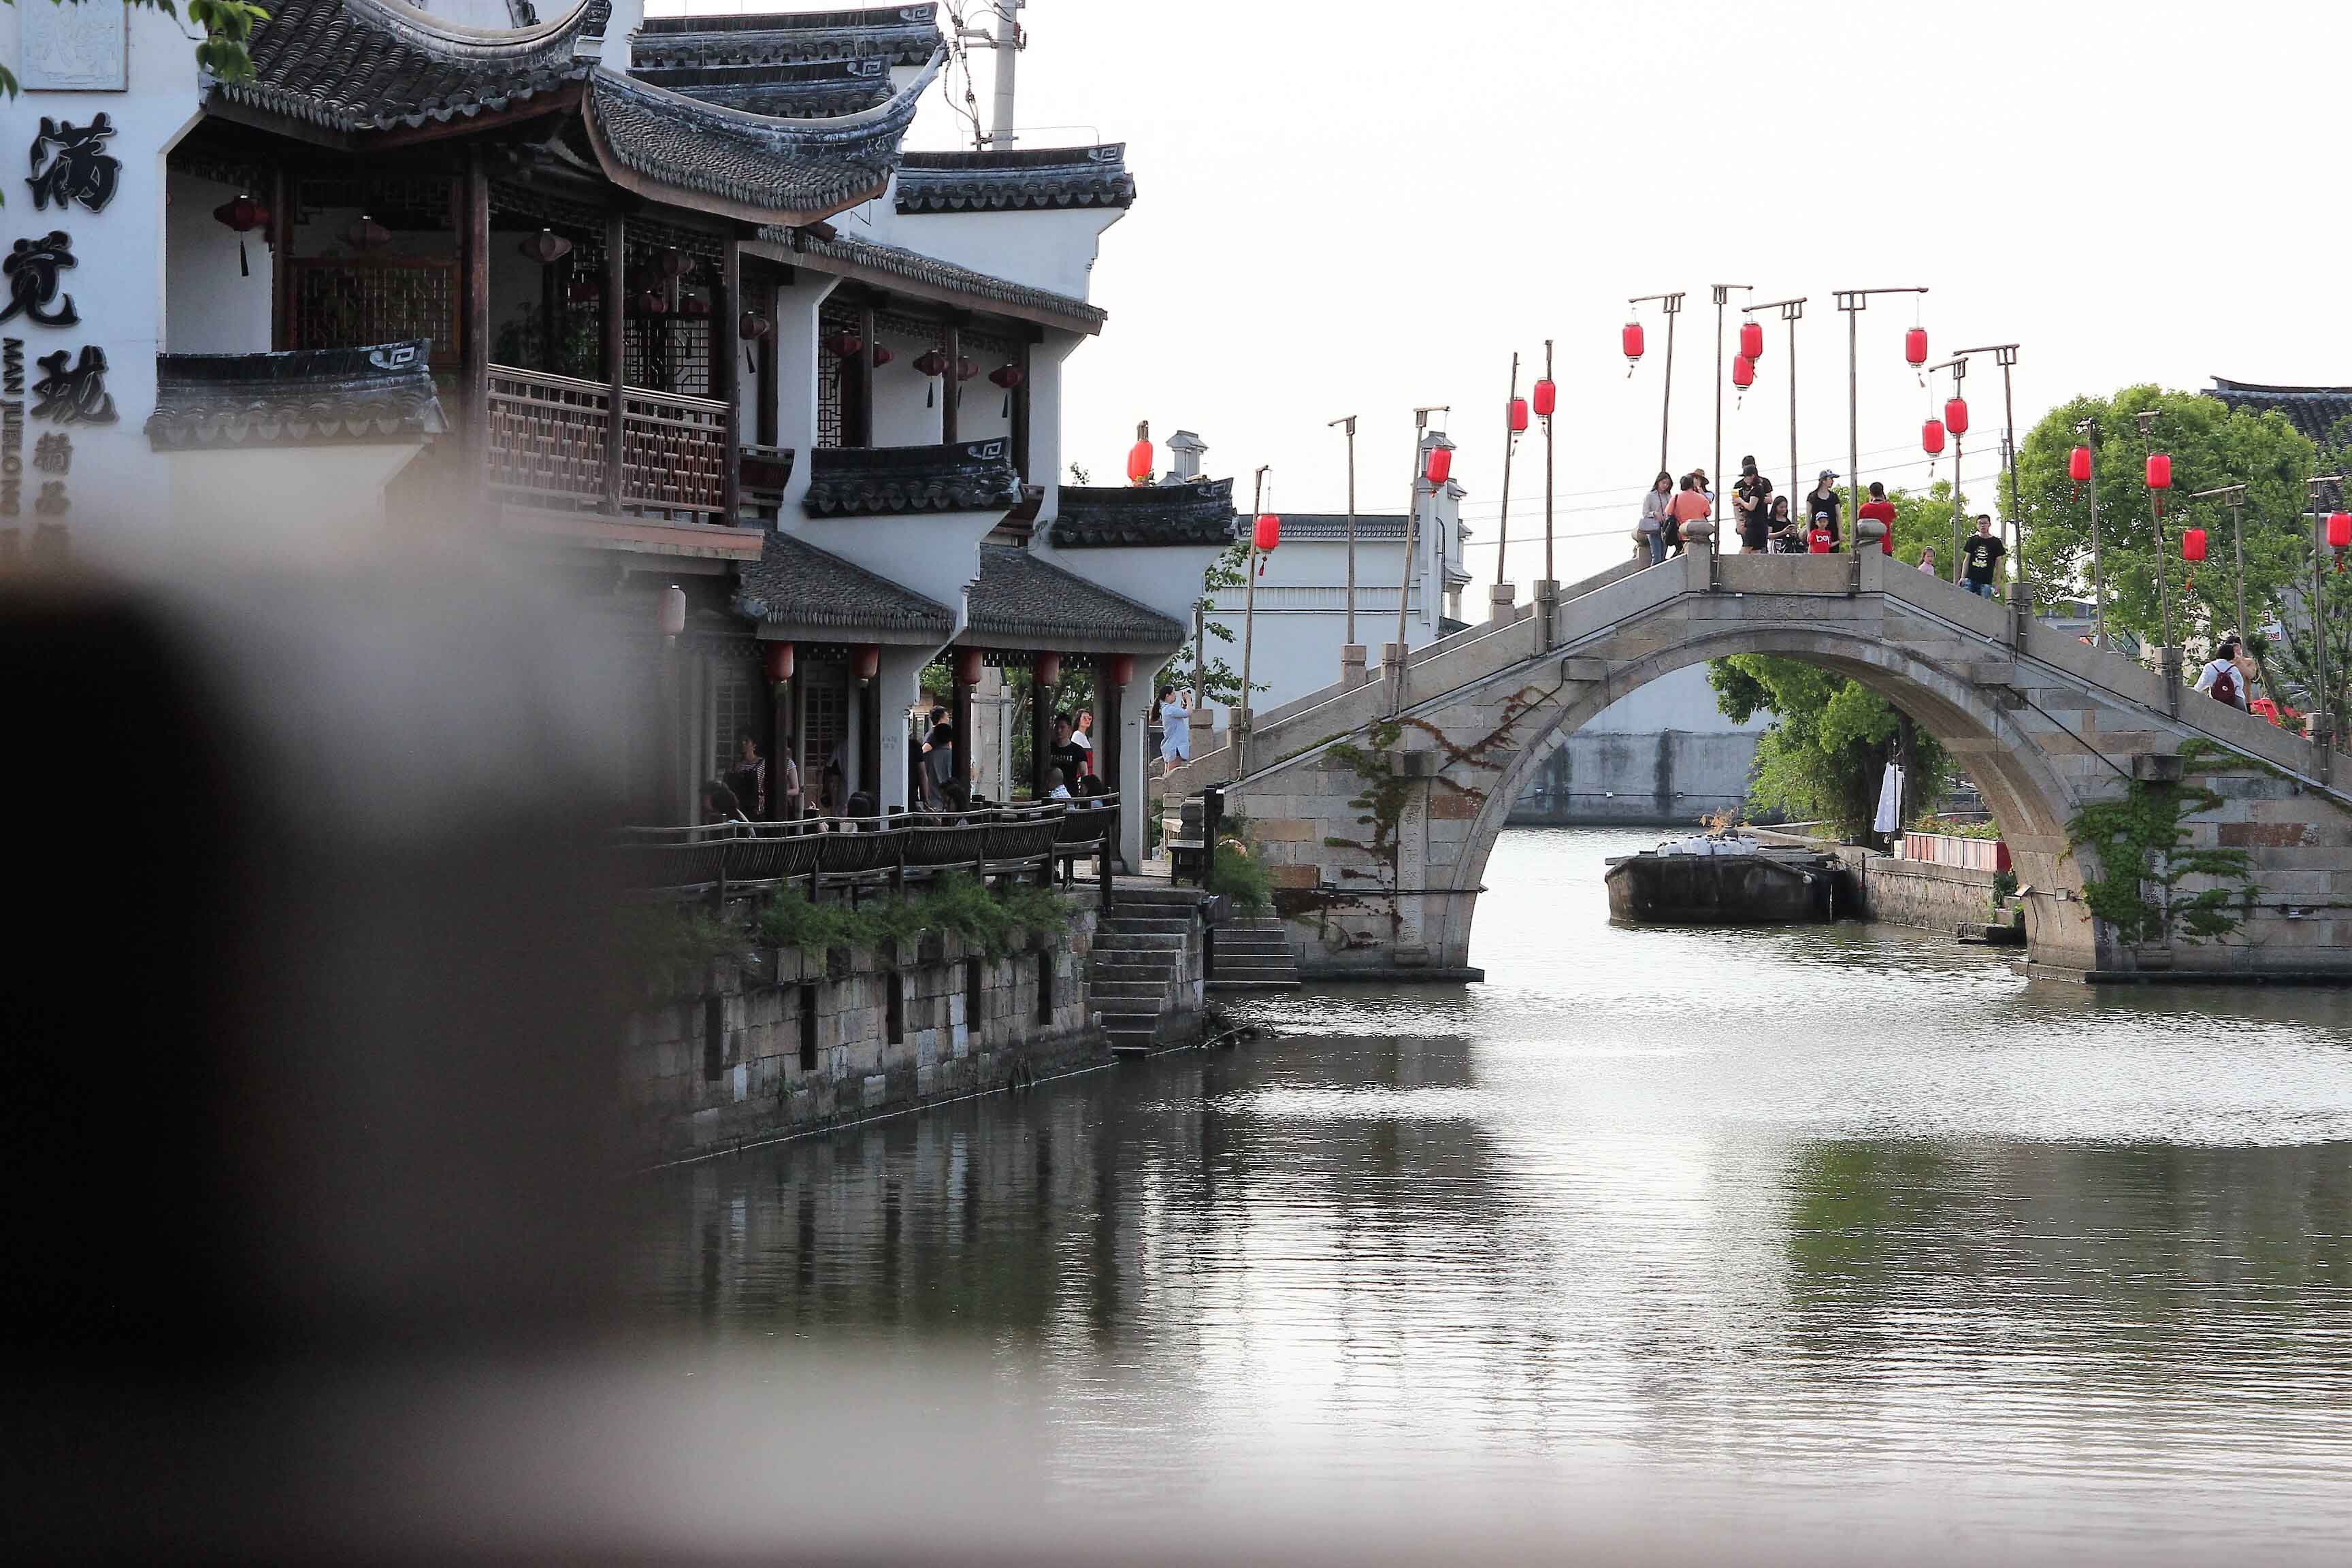 The river and ancient buildings in Xitang, China.